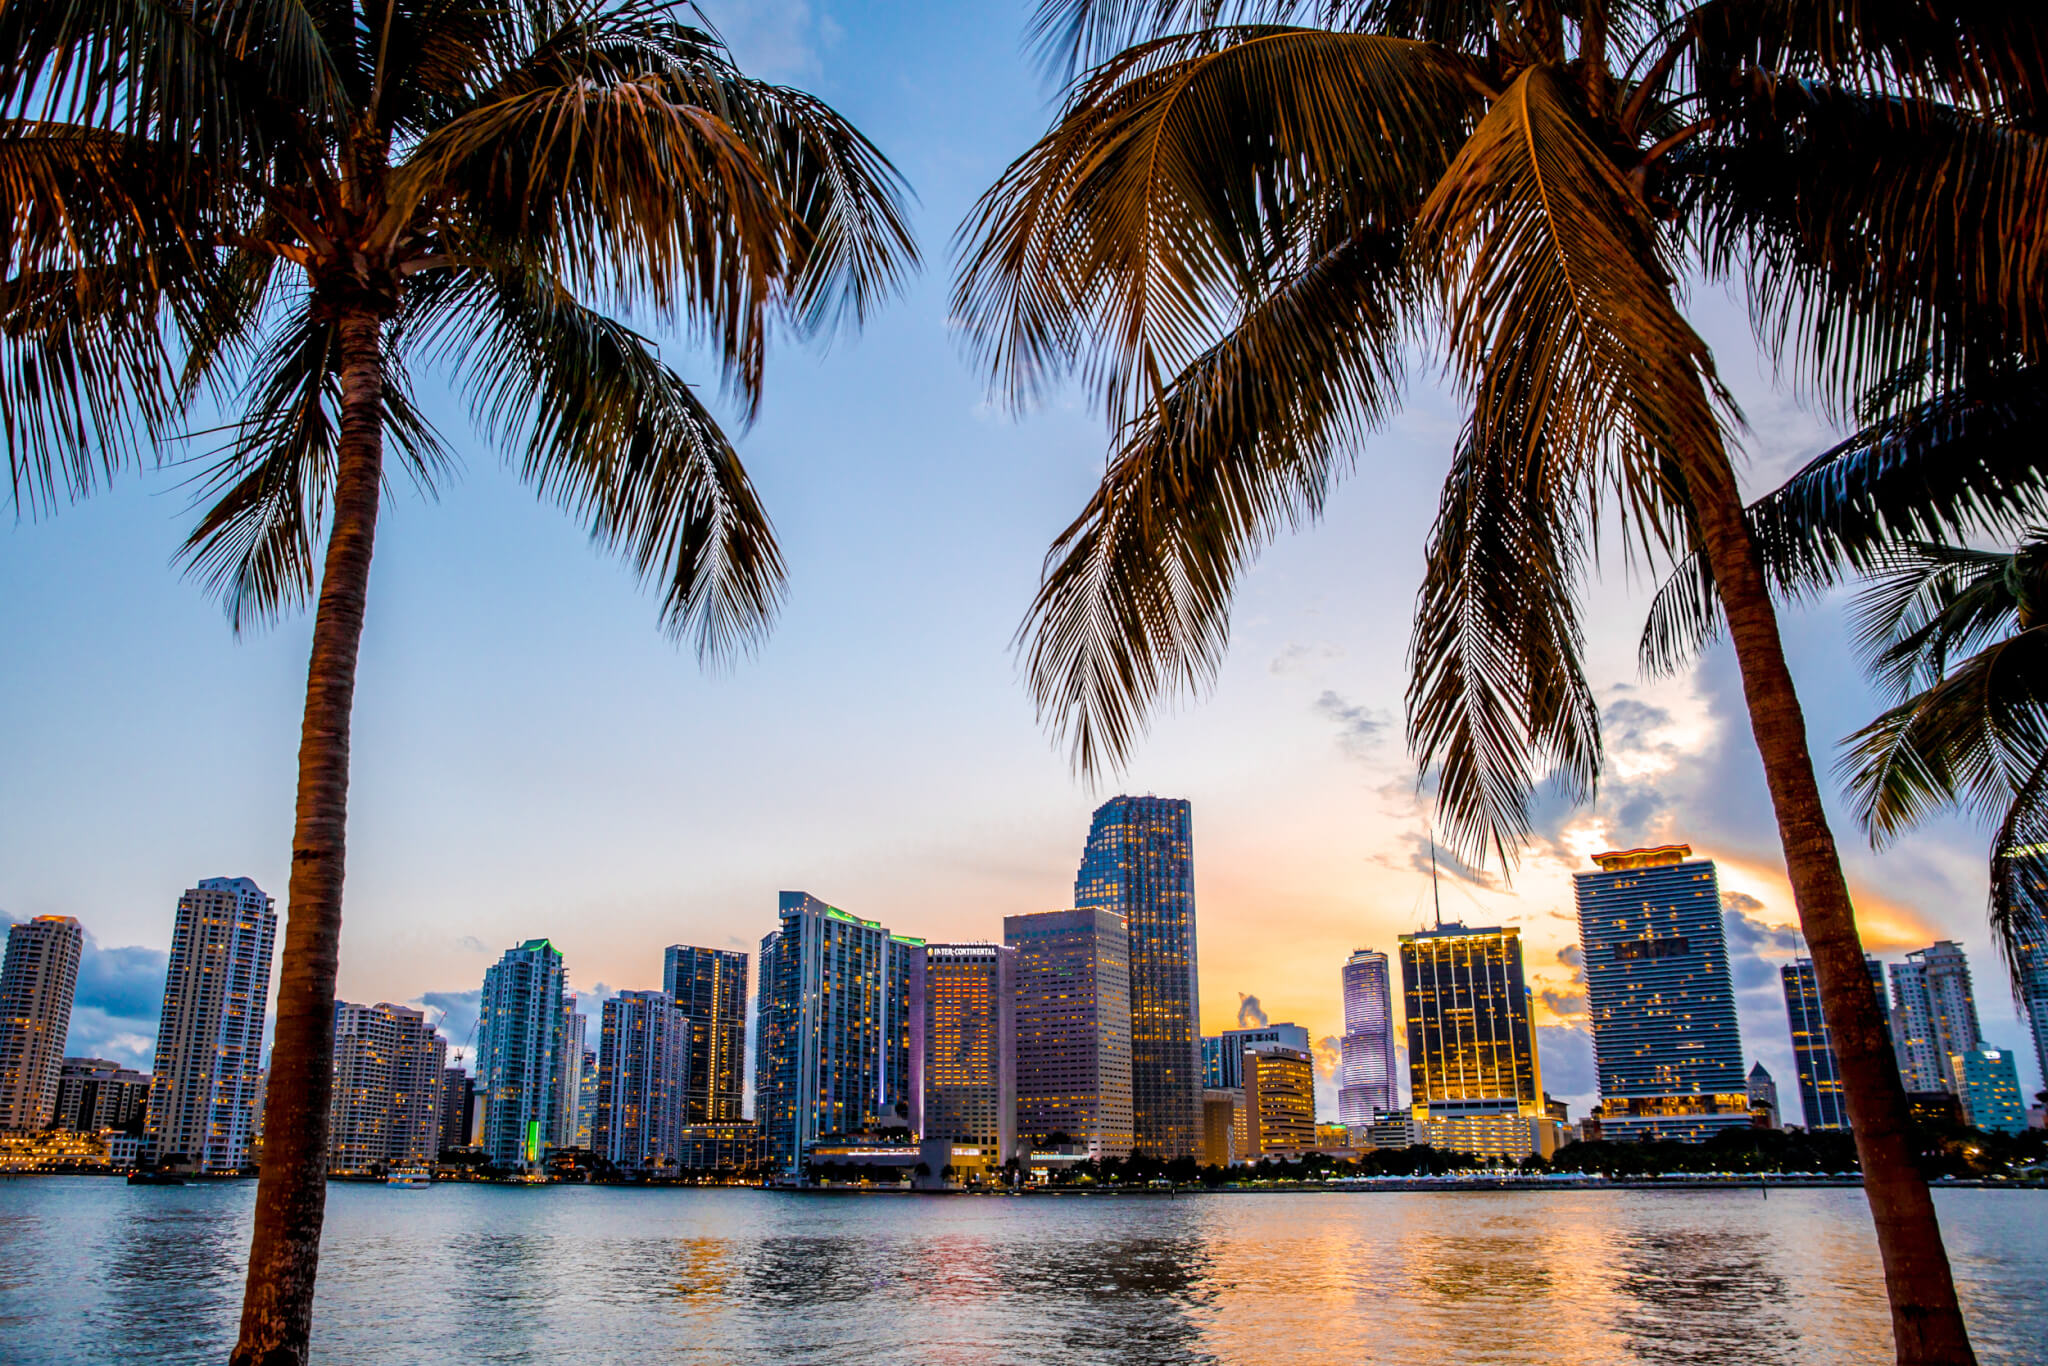 Miami, Florida skyline and bay at sunset seen through palm trees